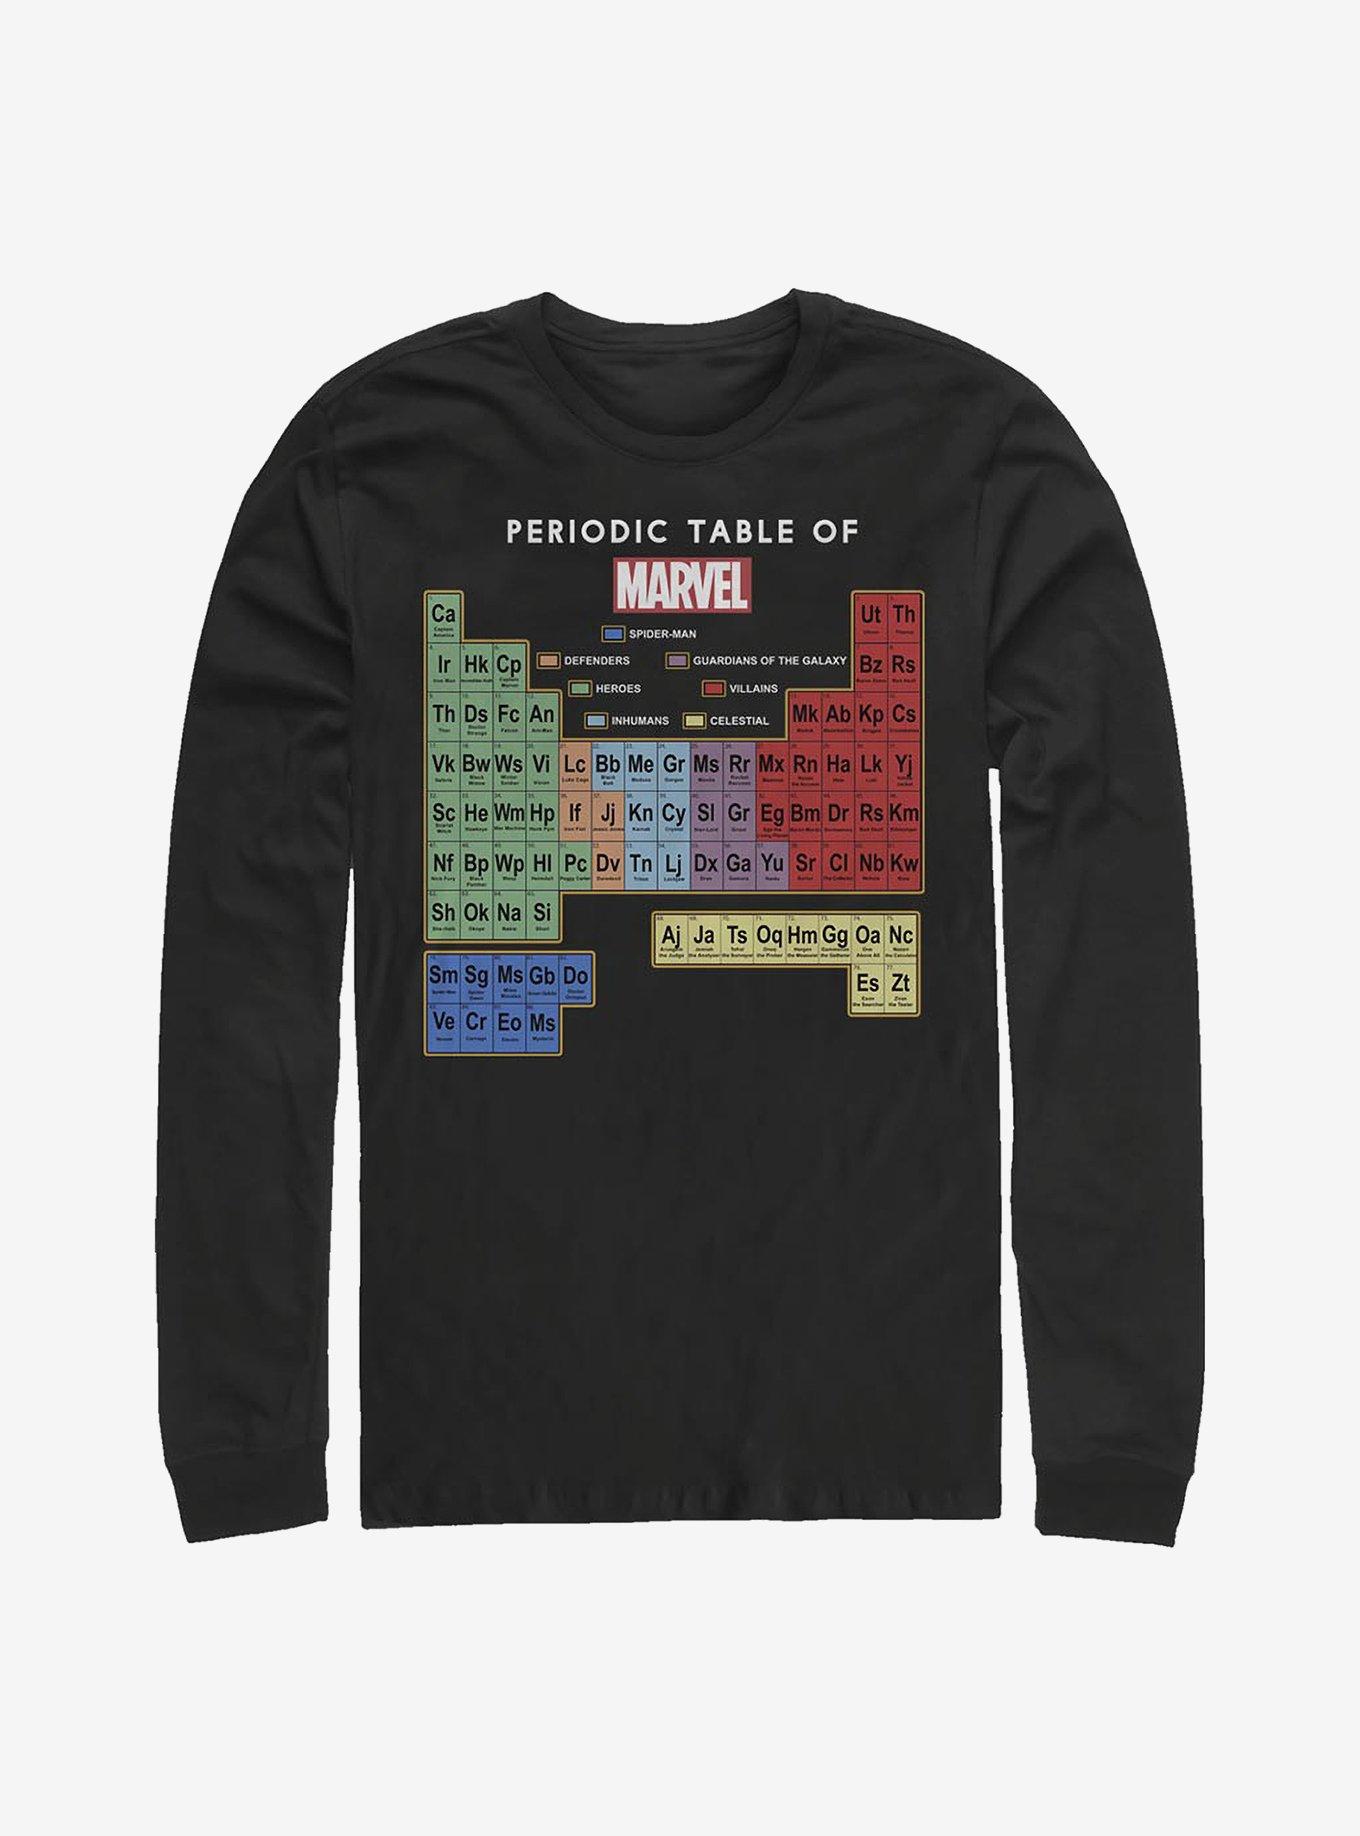 Marvel Periodic Table Of Marvel Long-Sleeve T-Shirt, BLACK, hi-res